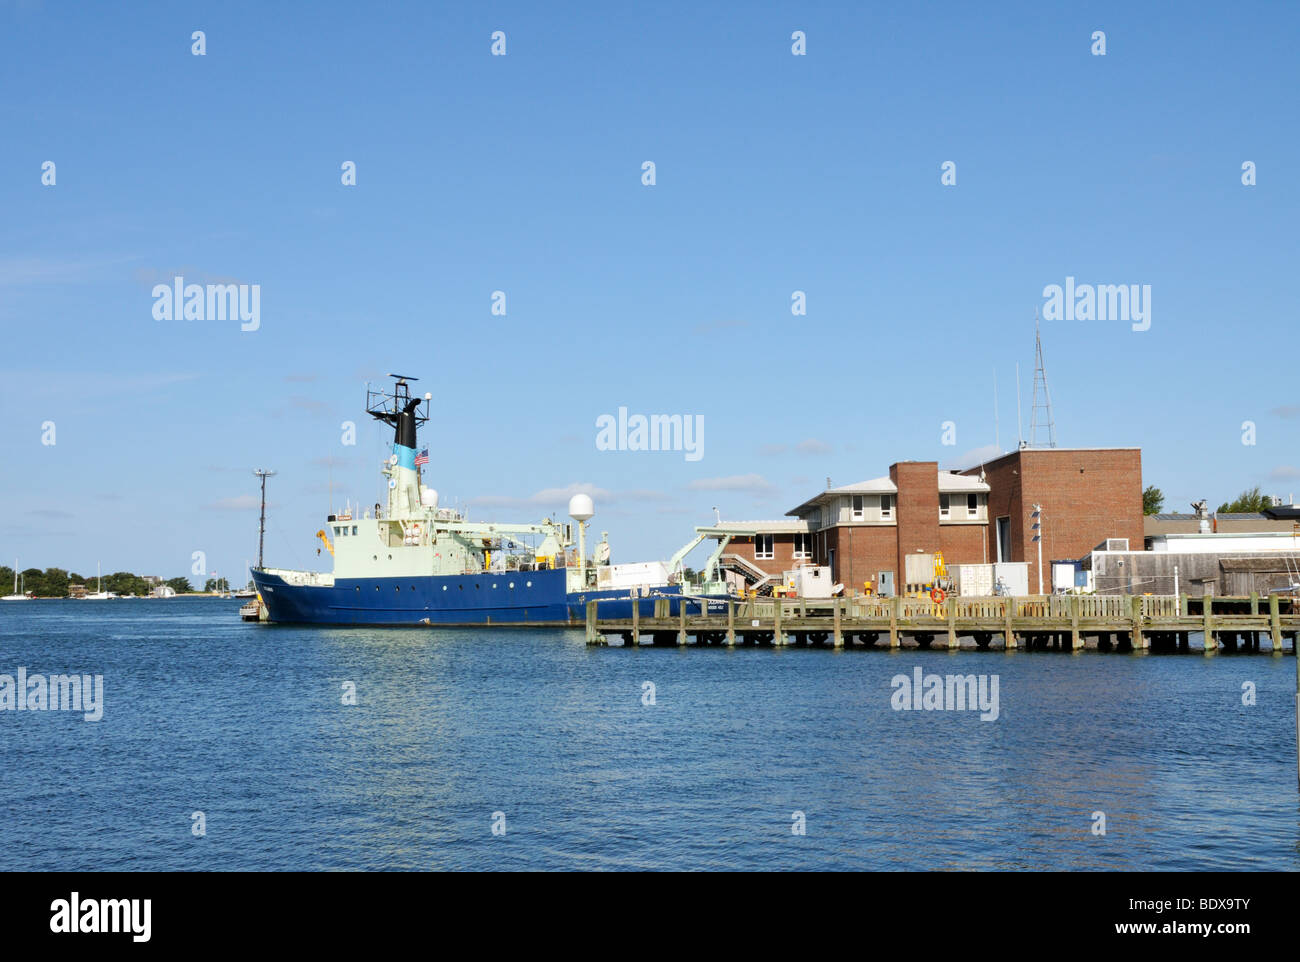 Woods Hole Oceanographic Institution WHOI, research vessel and buildings in Woods Hole, Falmouth, Cape Cod Stock Photo